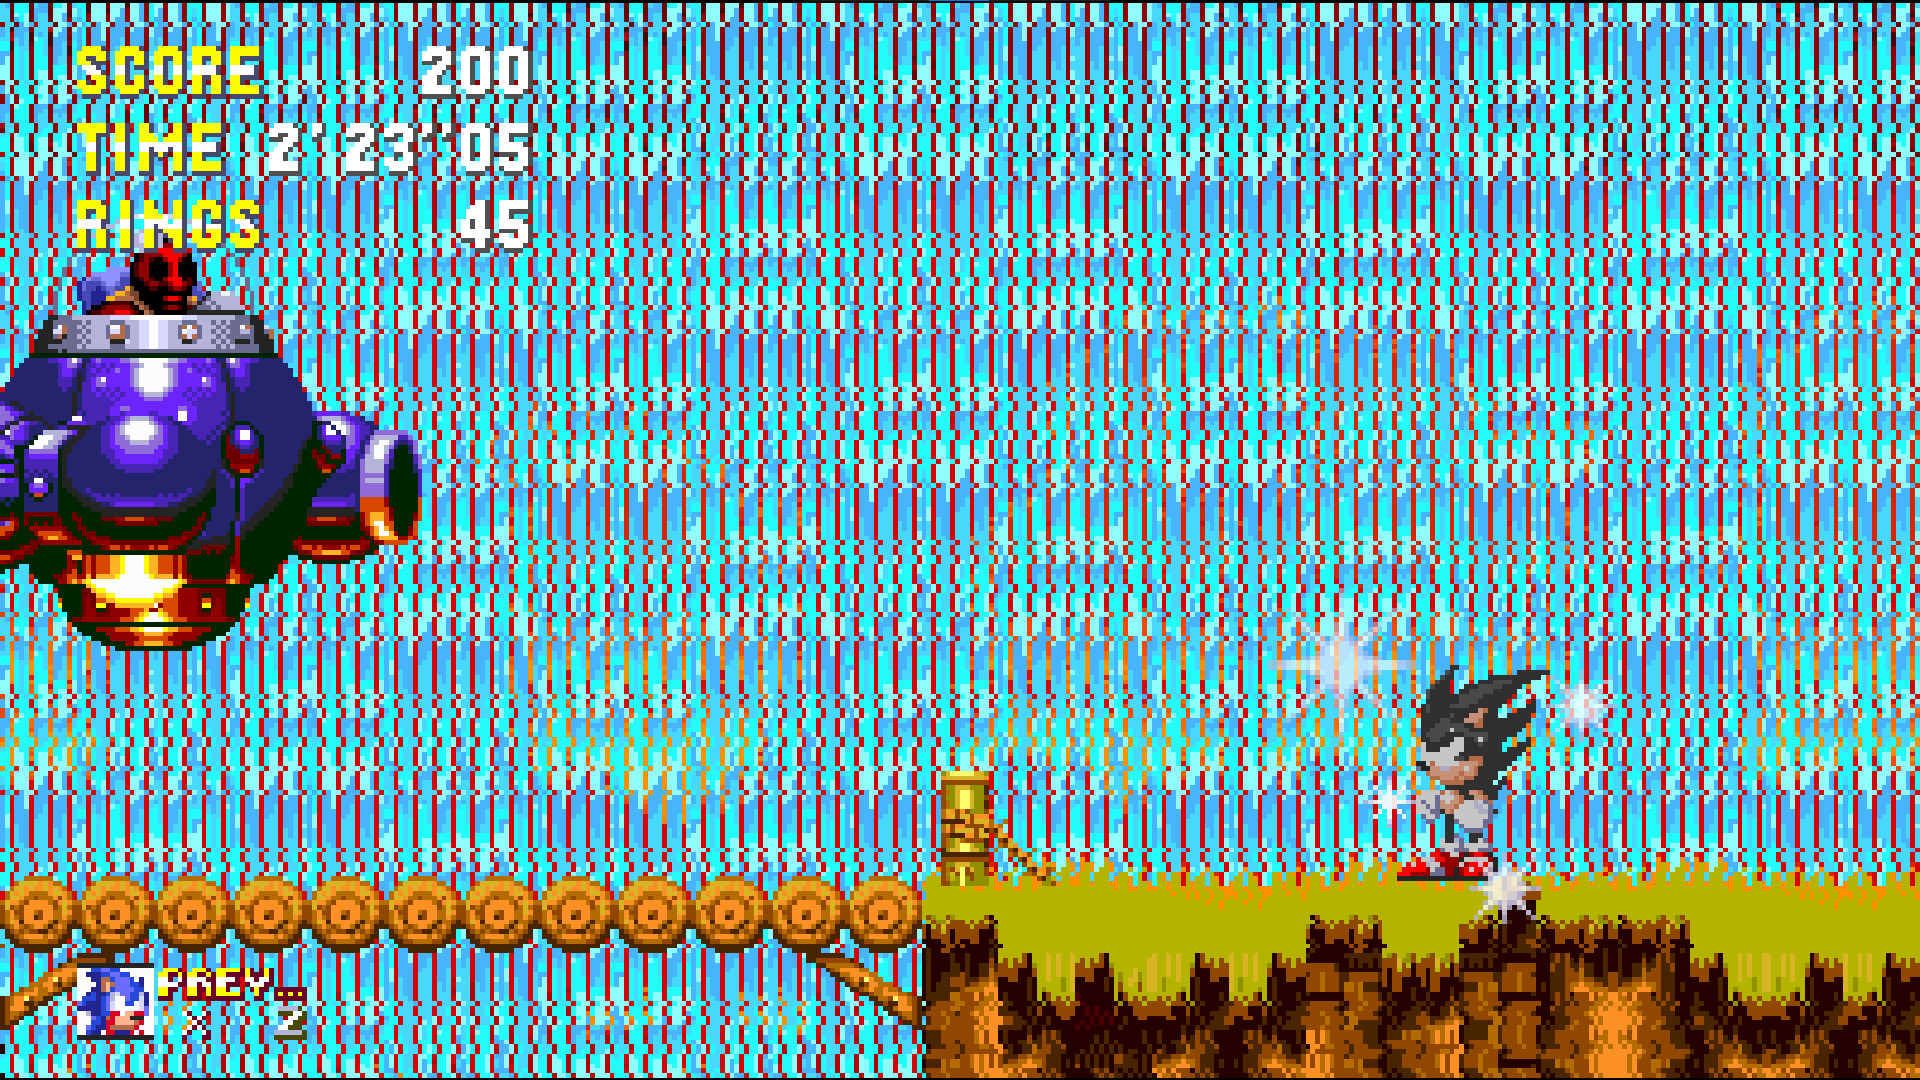 Sonic 3 & Starved 